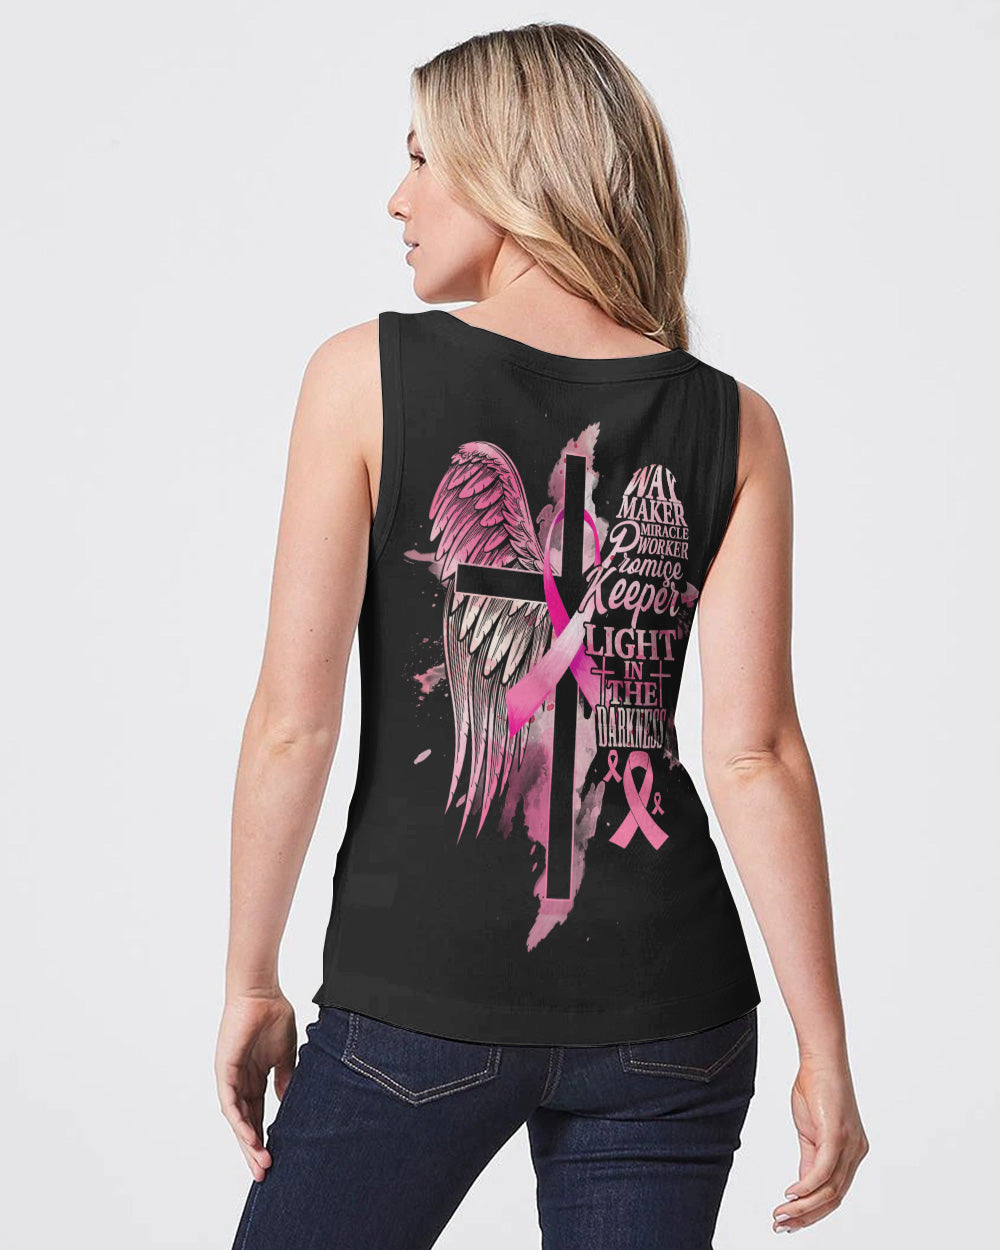 Way Maker Miracle Worker Promise Keeper Life Half Wings Women's Christian Tanks